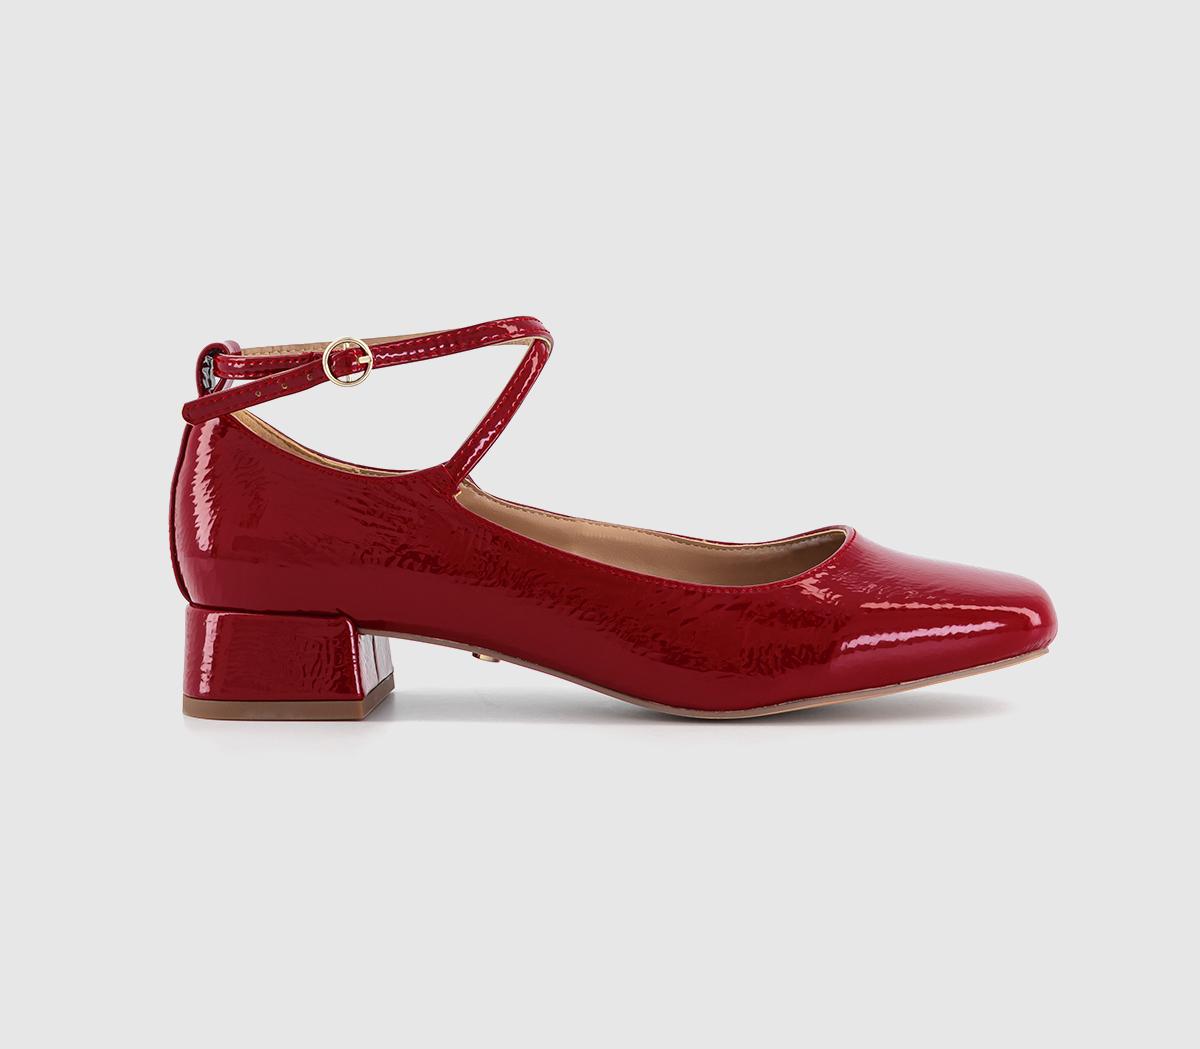 OFFICEFrancesca Cross Over Ankle Strap Mary Jane ShoesRed Patent